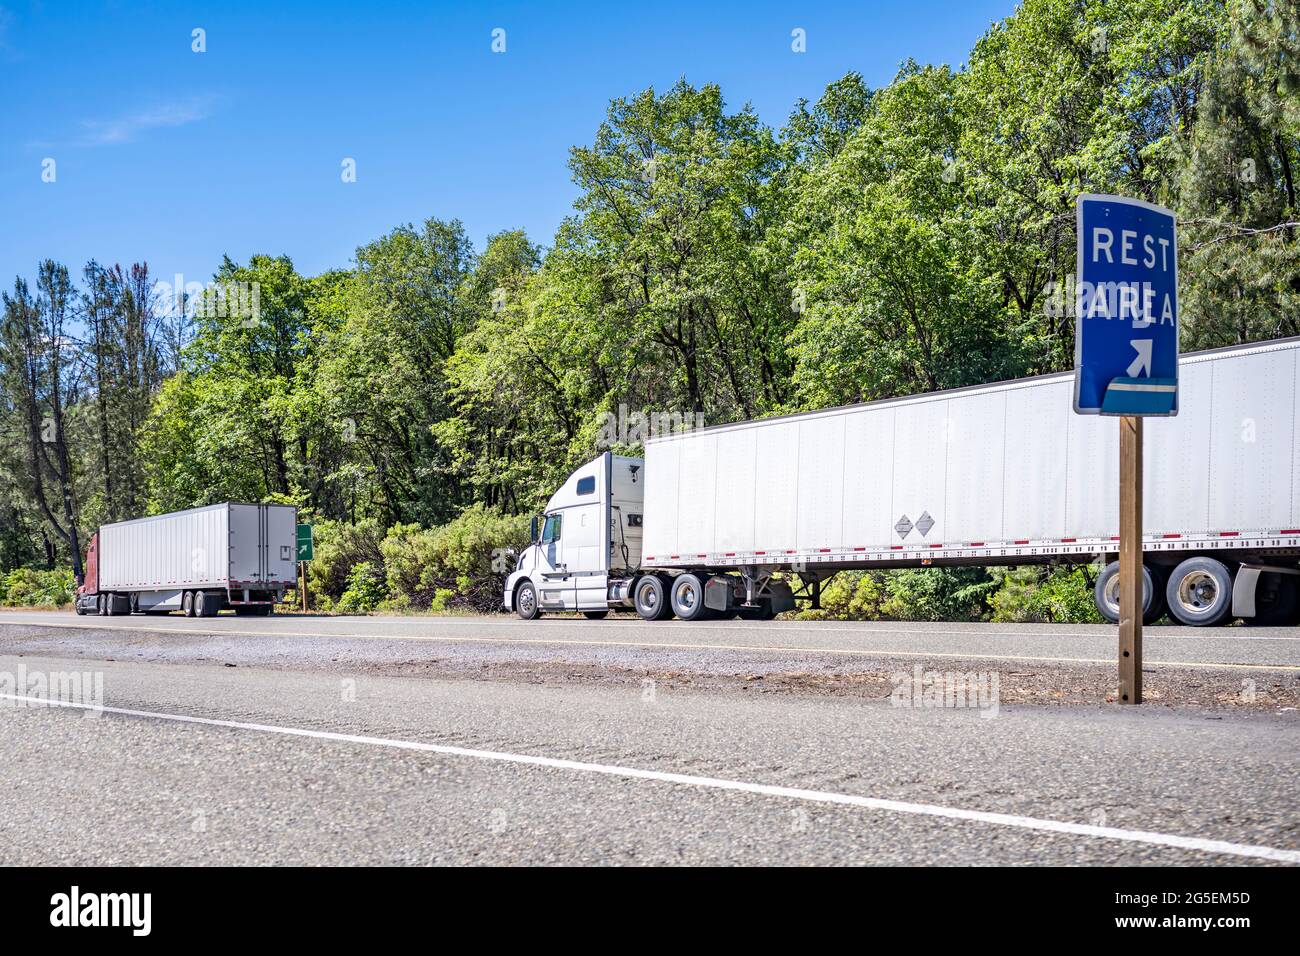 Group of big rigs semi trucks tractors transporting cargo in different semi trailers standing in a line by the side of the highway road for a break ou Stock Photo